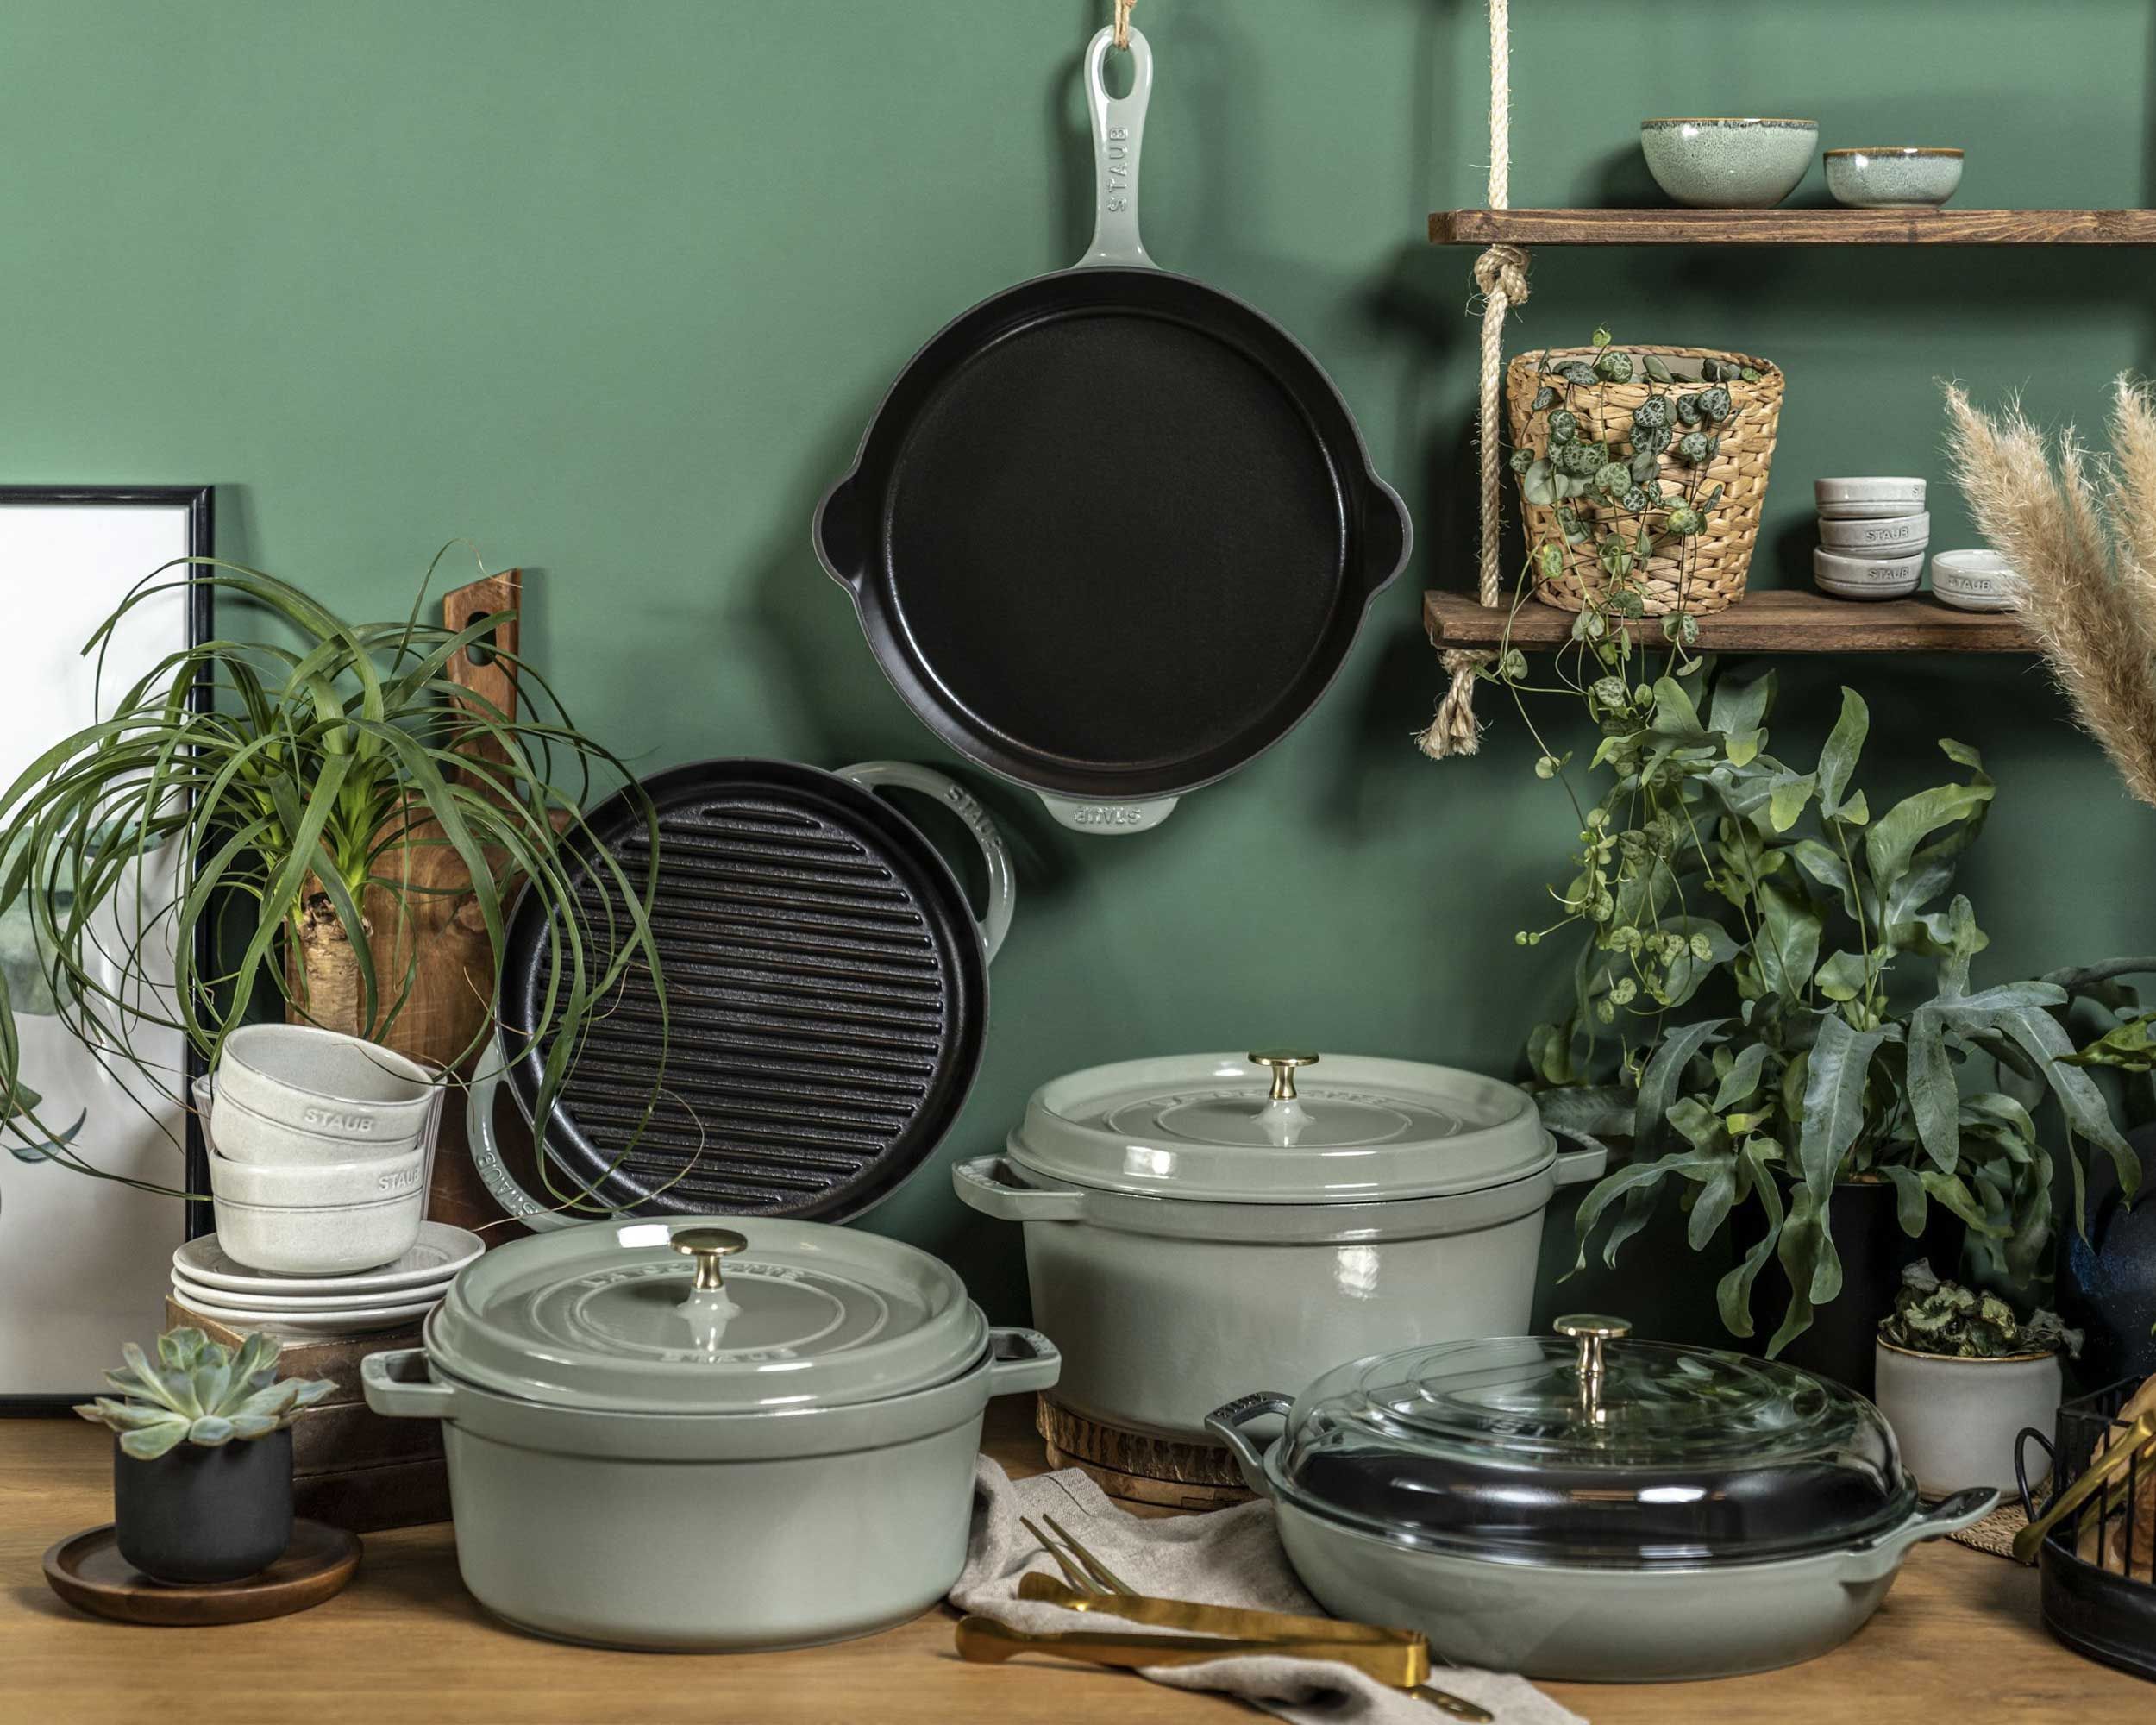 Staub Reveals Its New Colourway For Its Premium Cookware